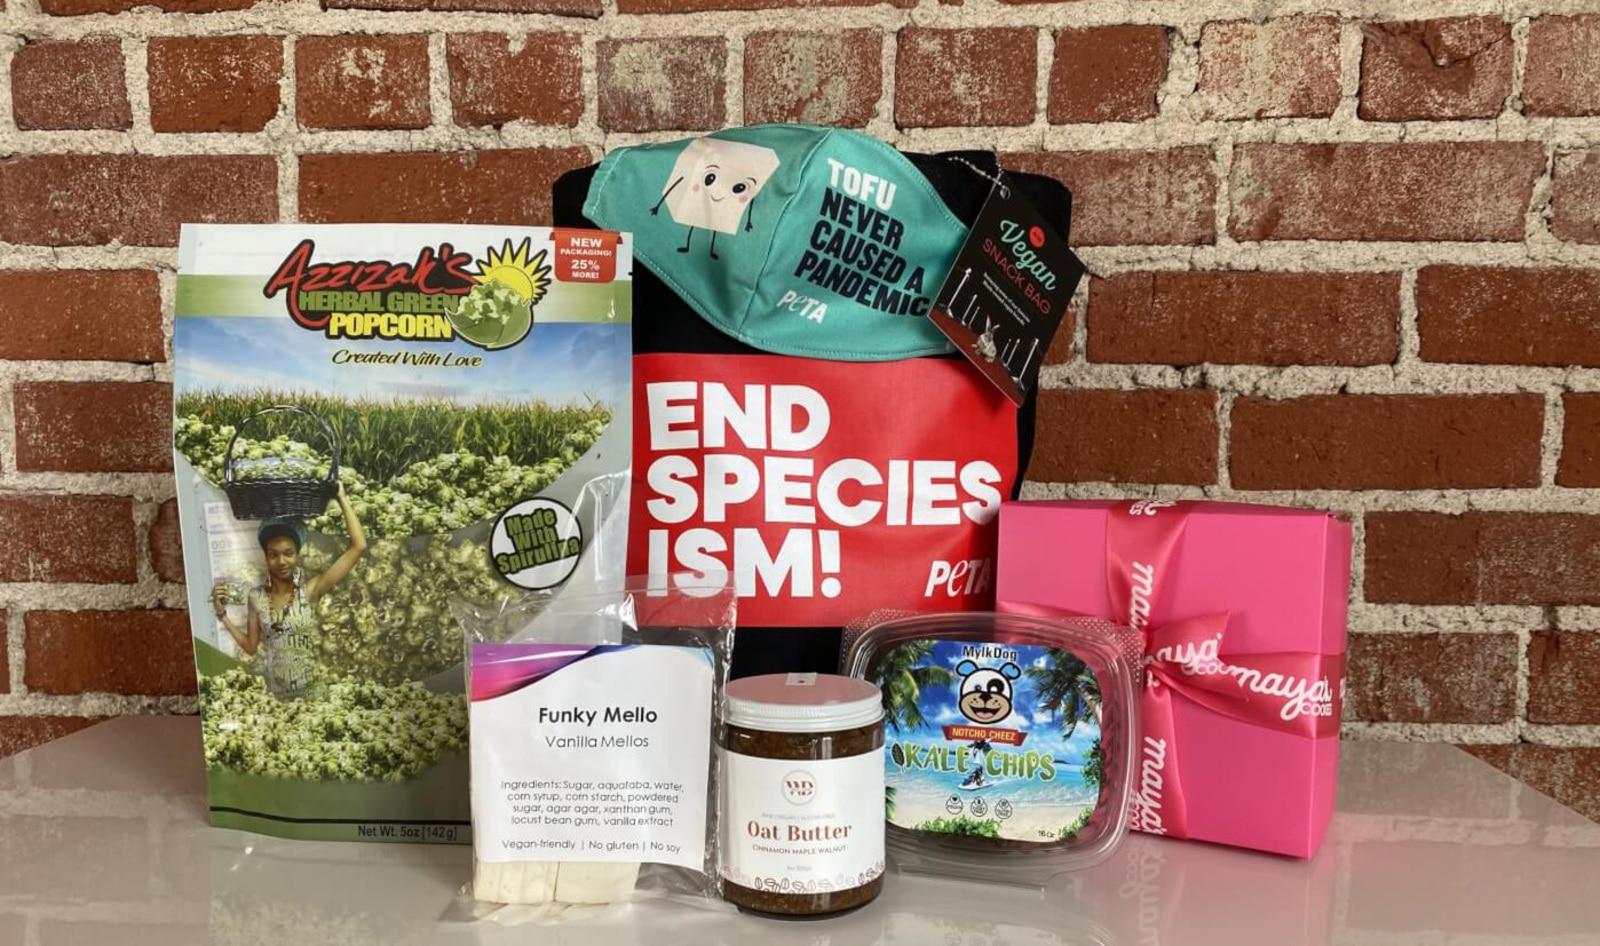 EMMY Nominees Get Vegan Gift Bag Filled with Snacks Made by Black-Owned Businesses